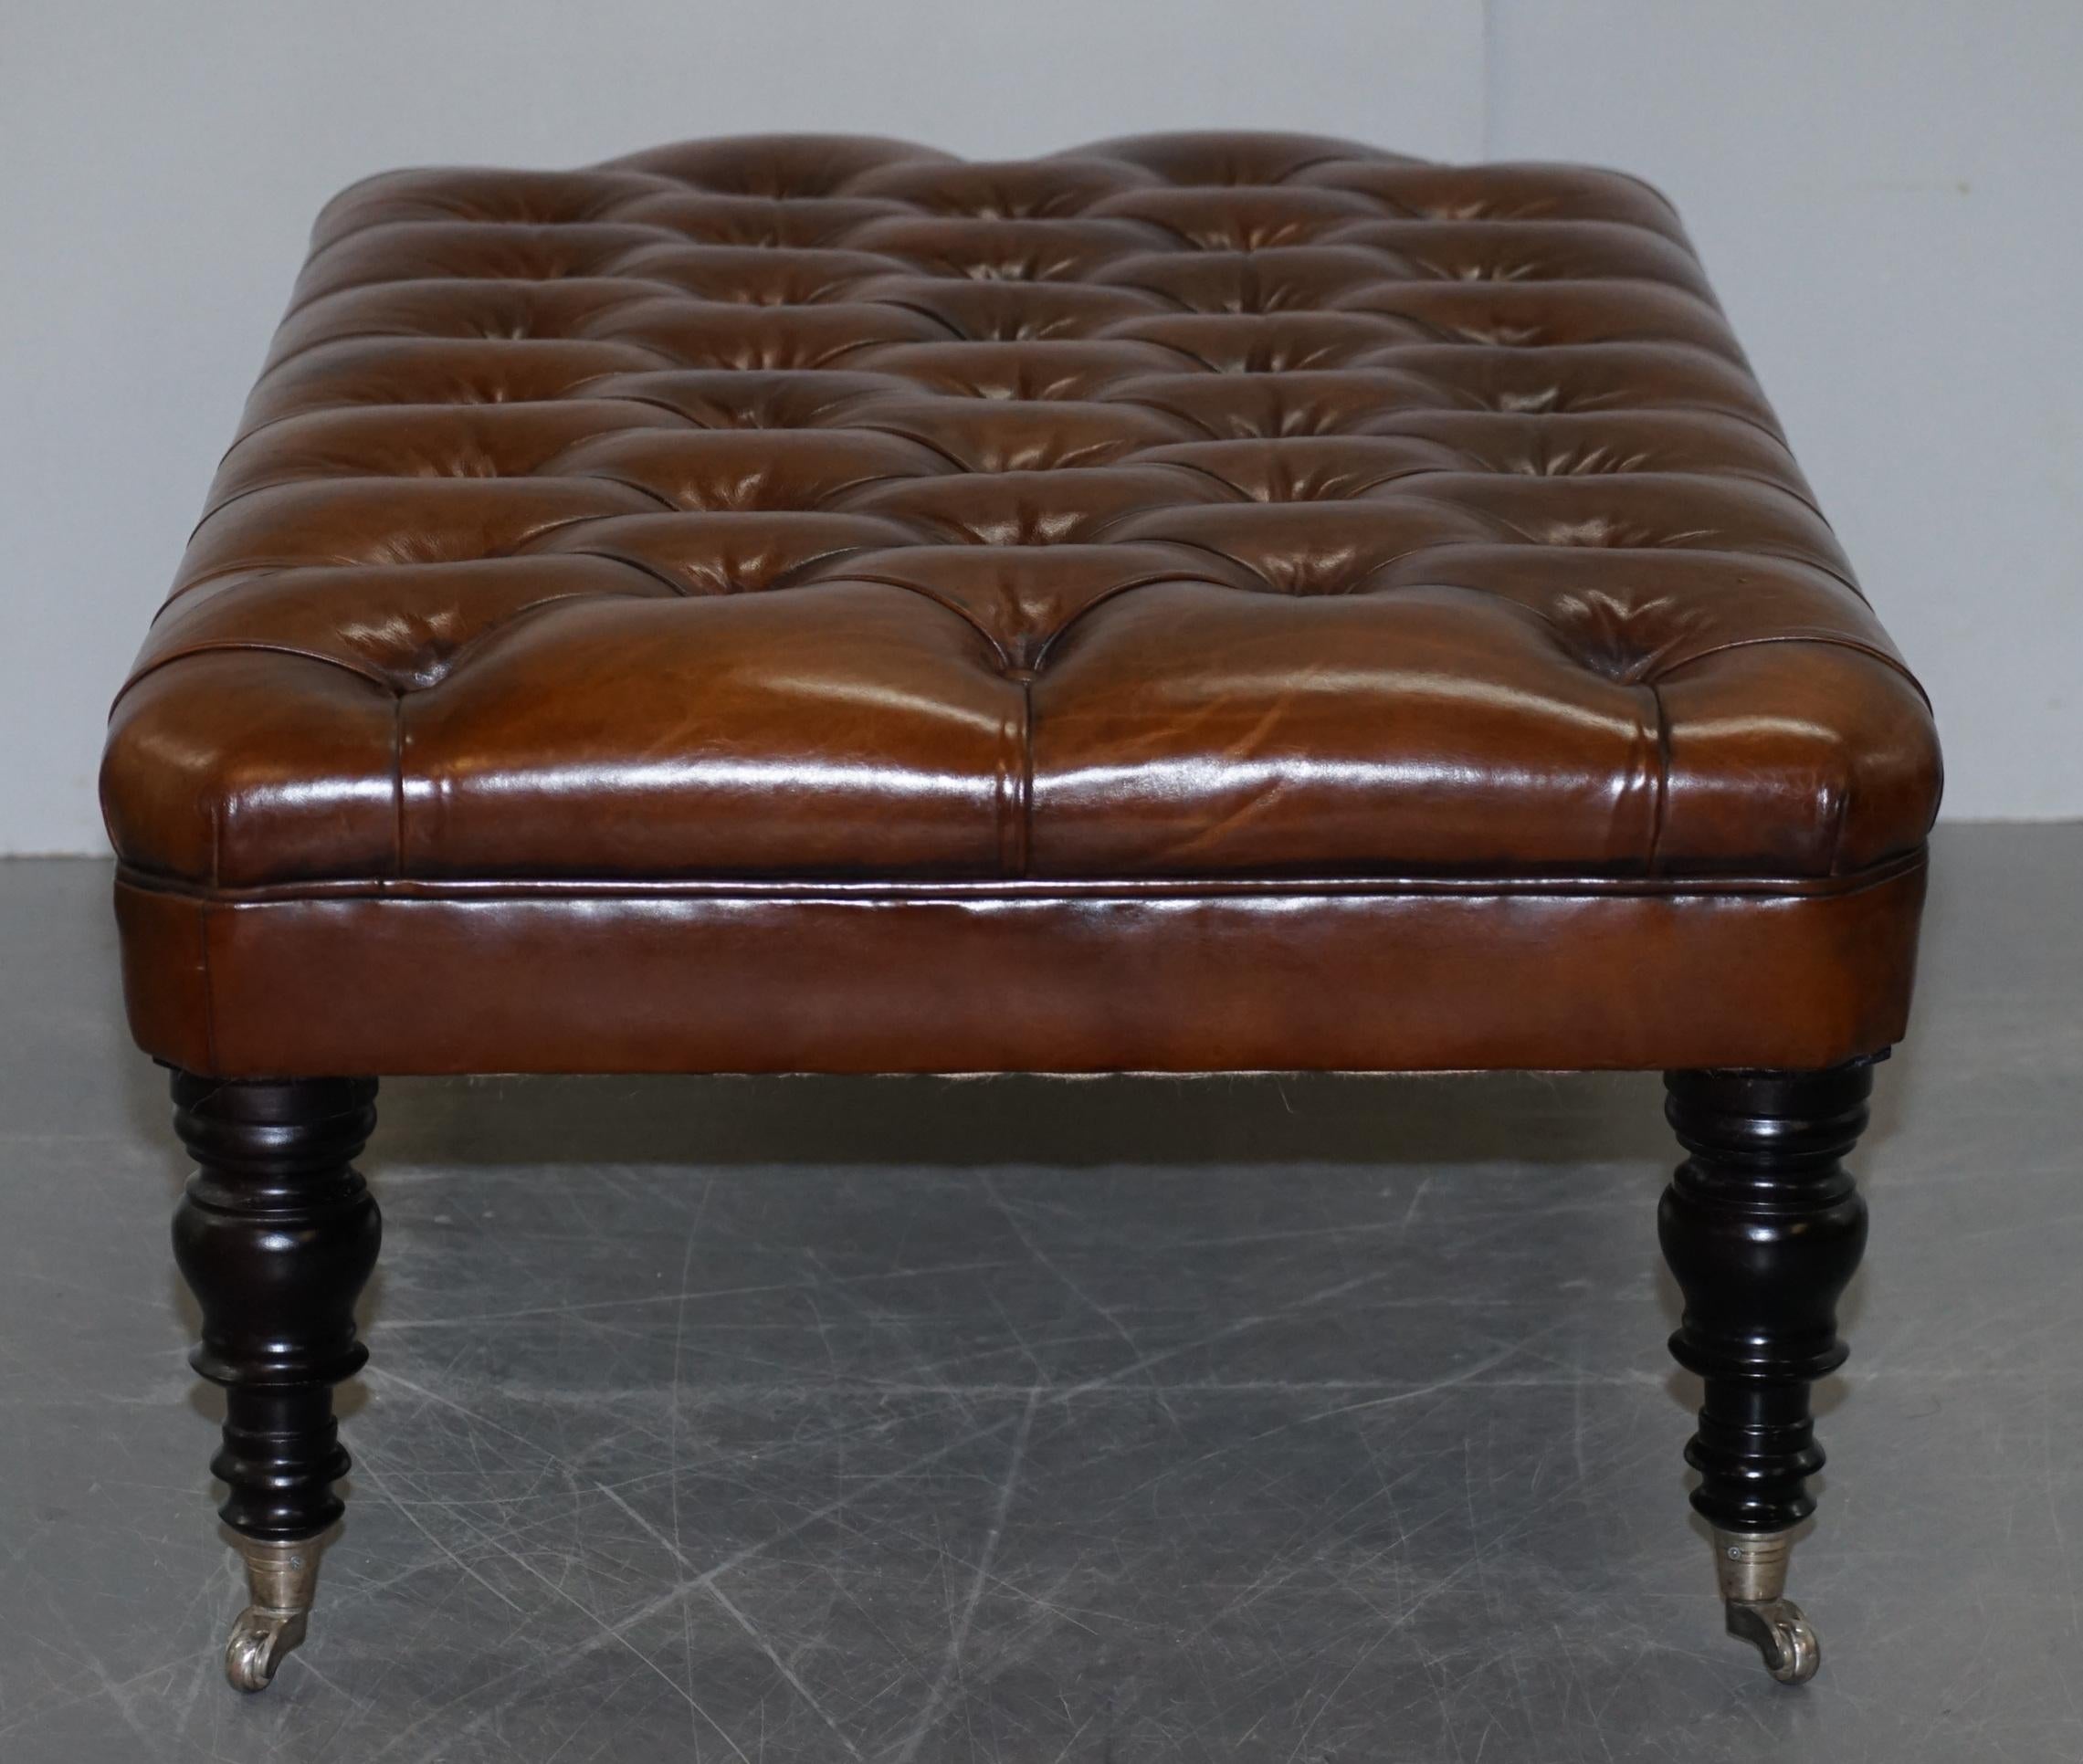 1 of 2 George Smith Restored Brown Leather Chesterfield Hearth Footstools 7